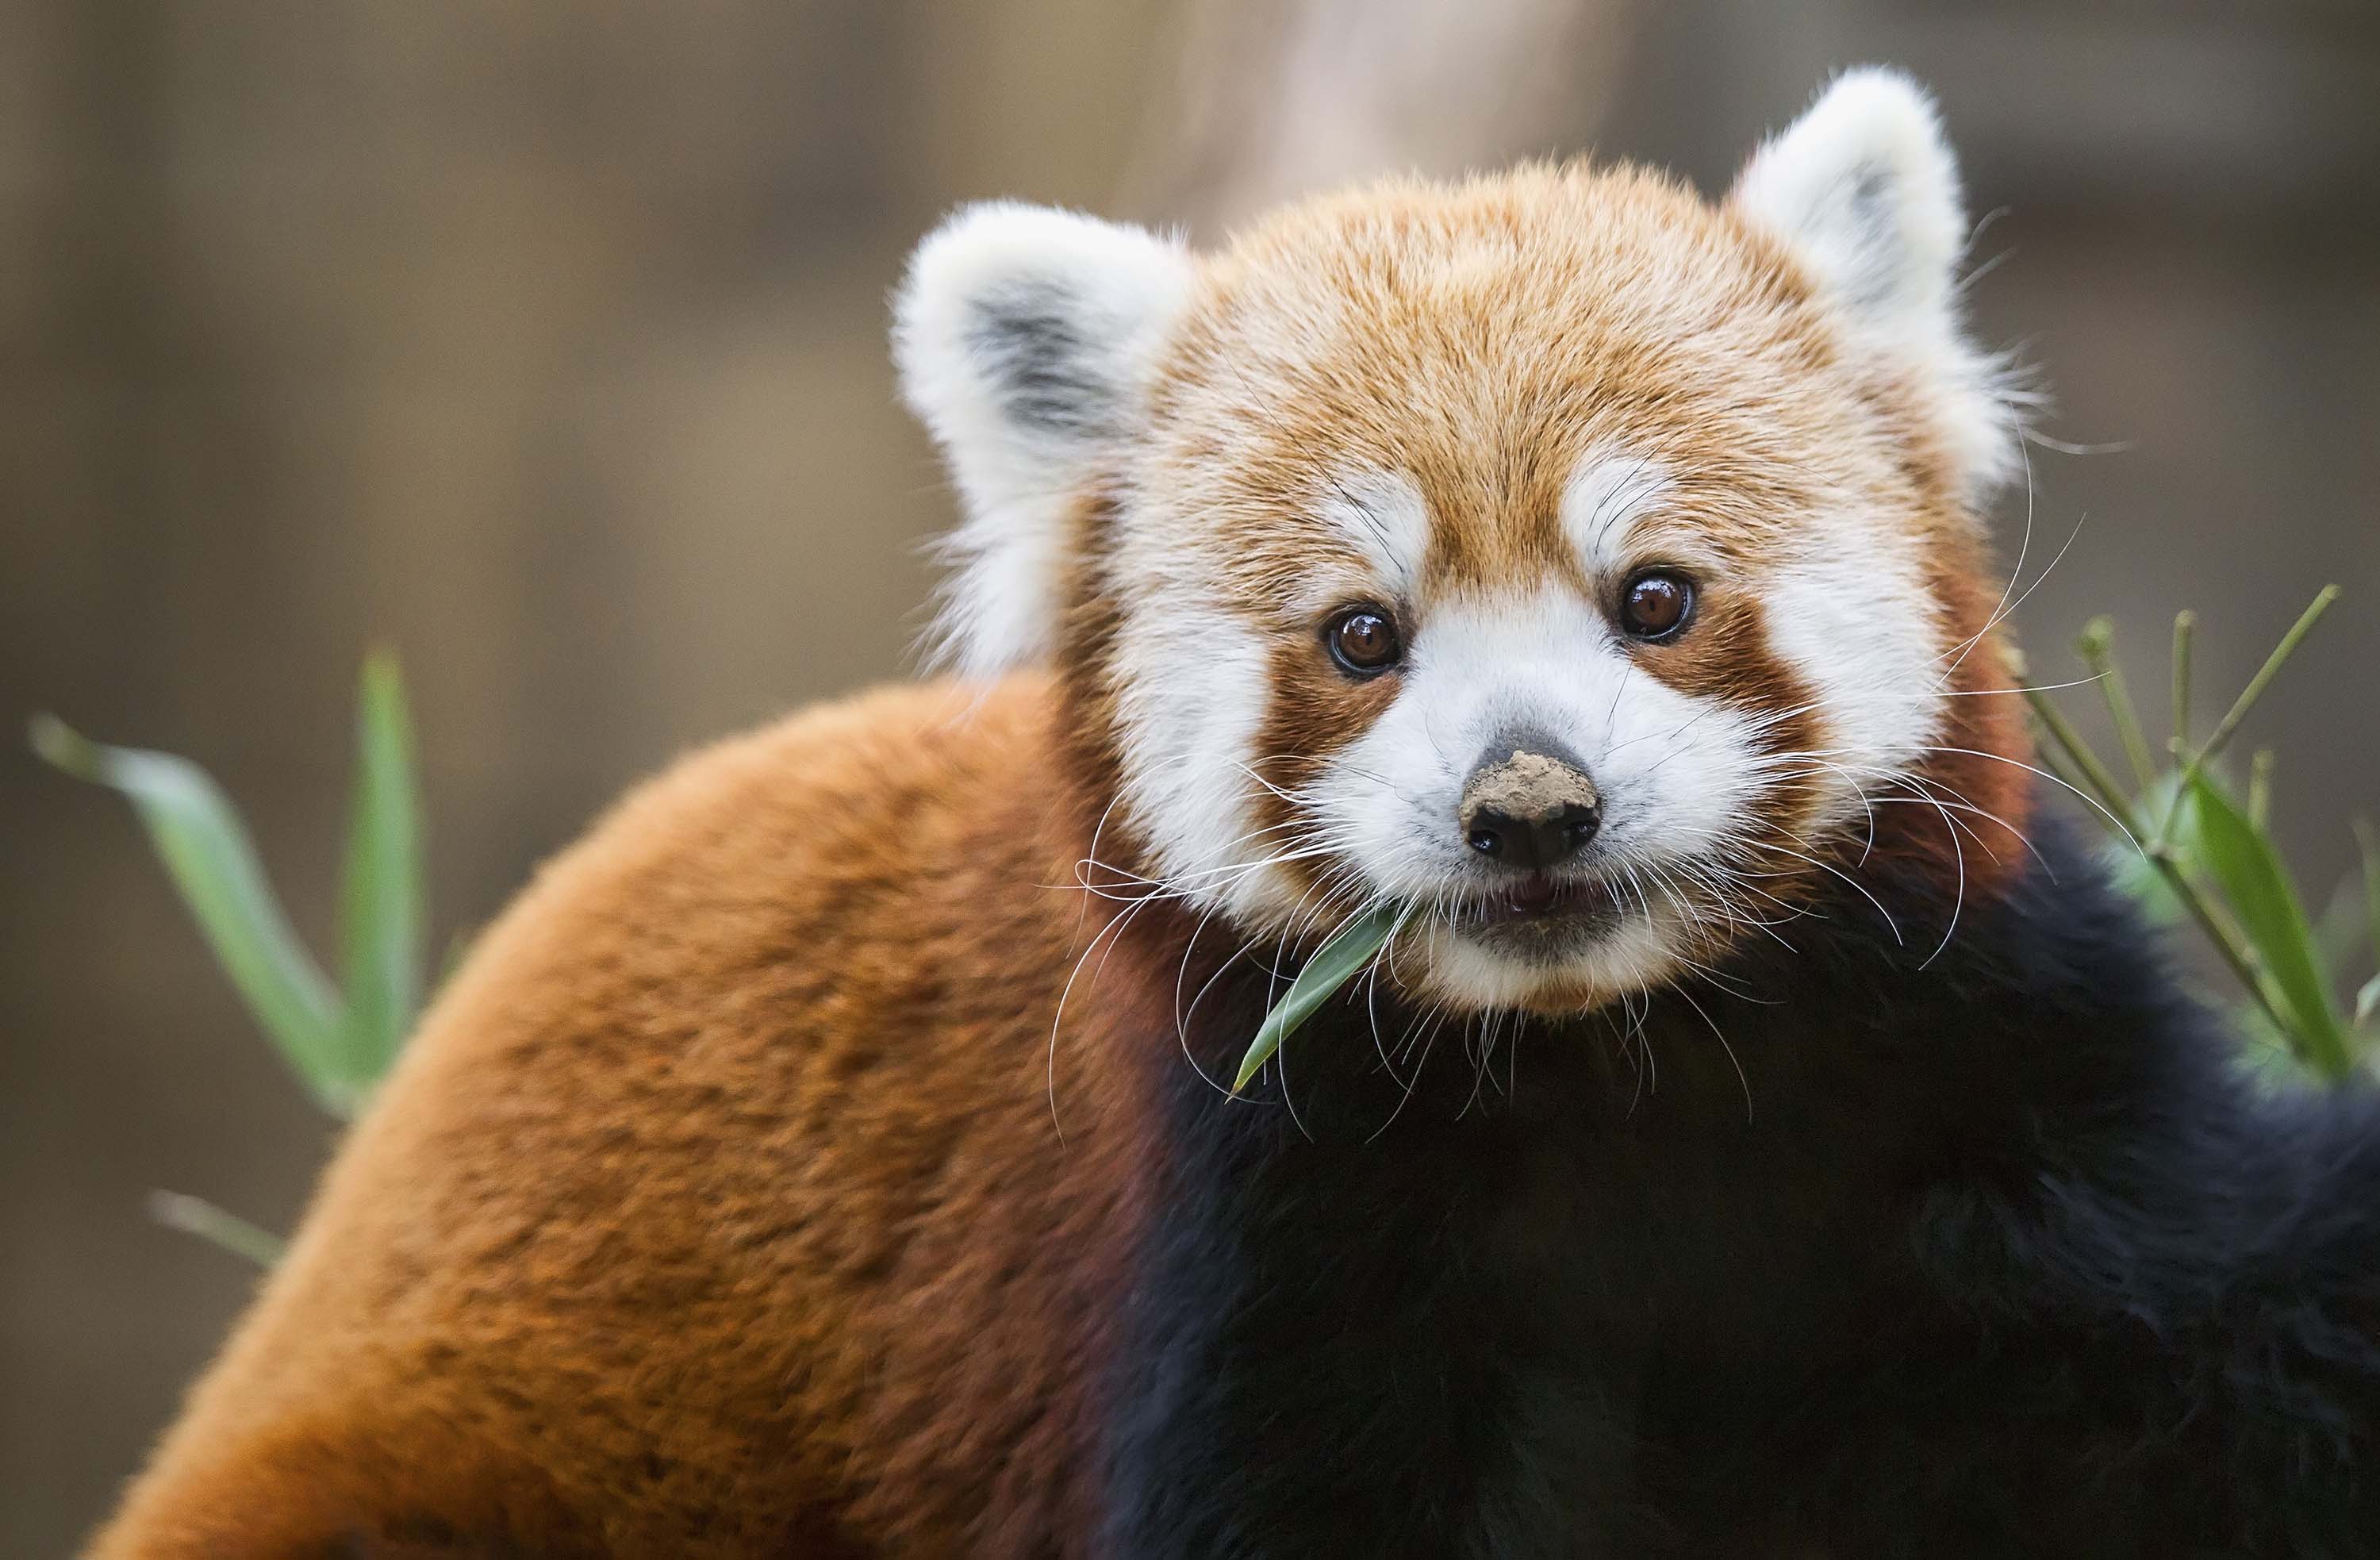 are two red panda, not just one | CNN